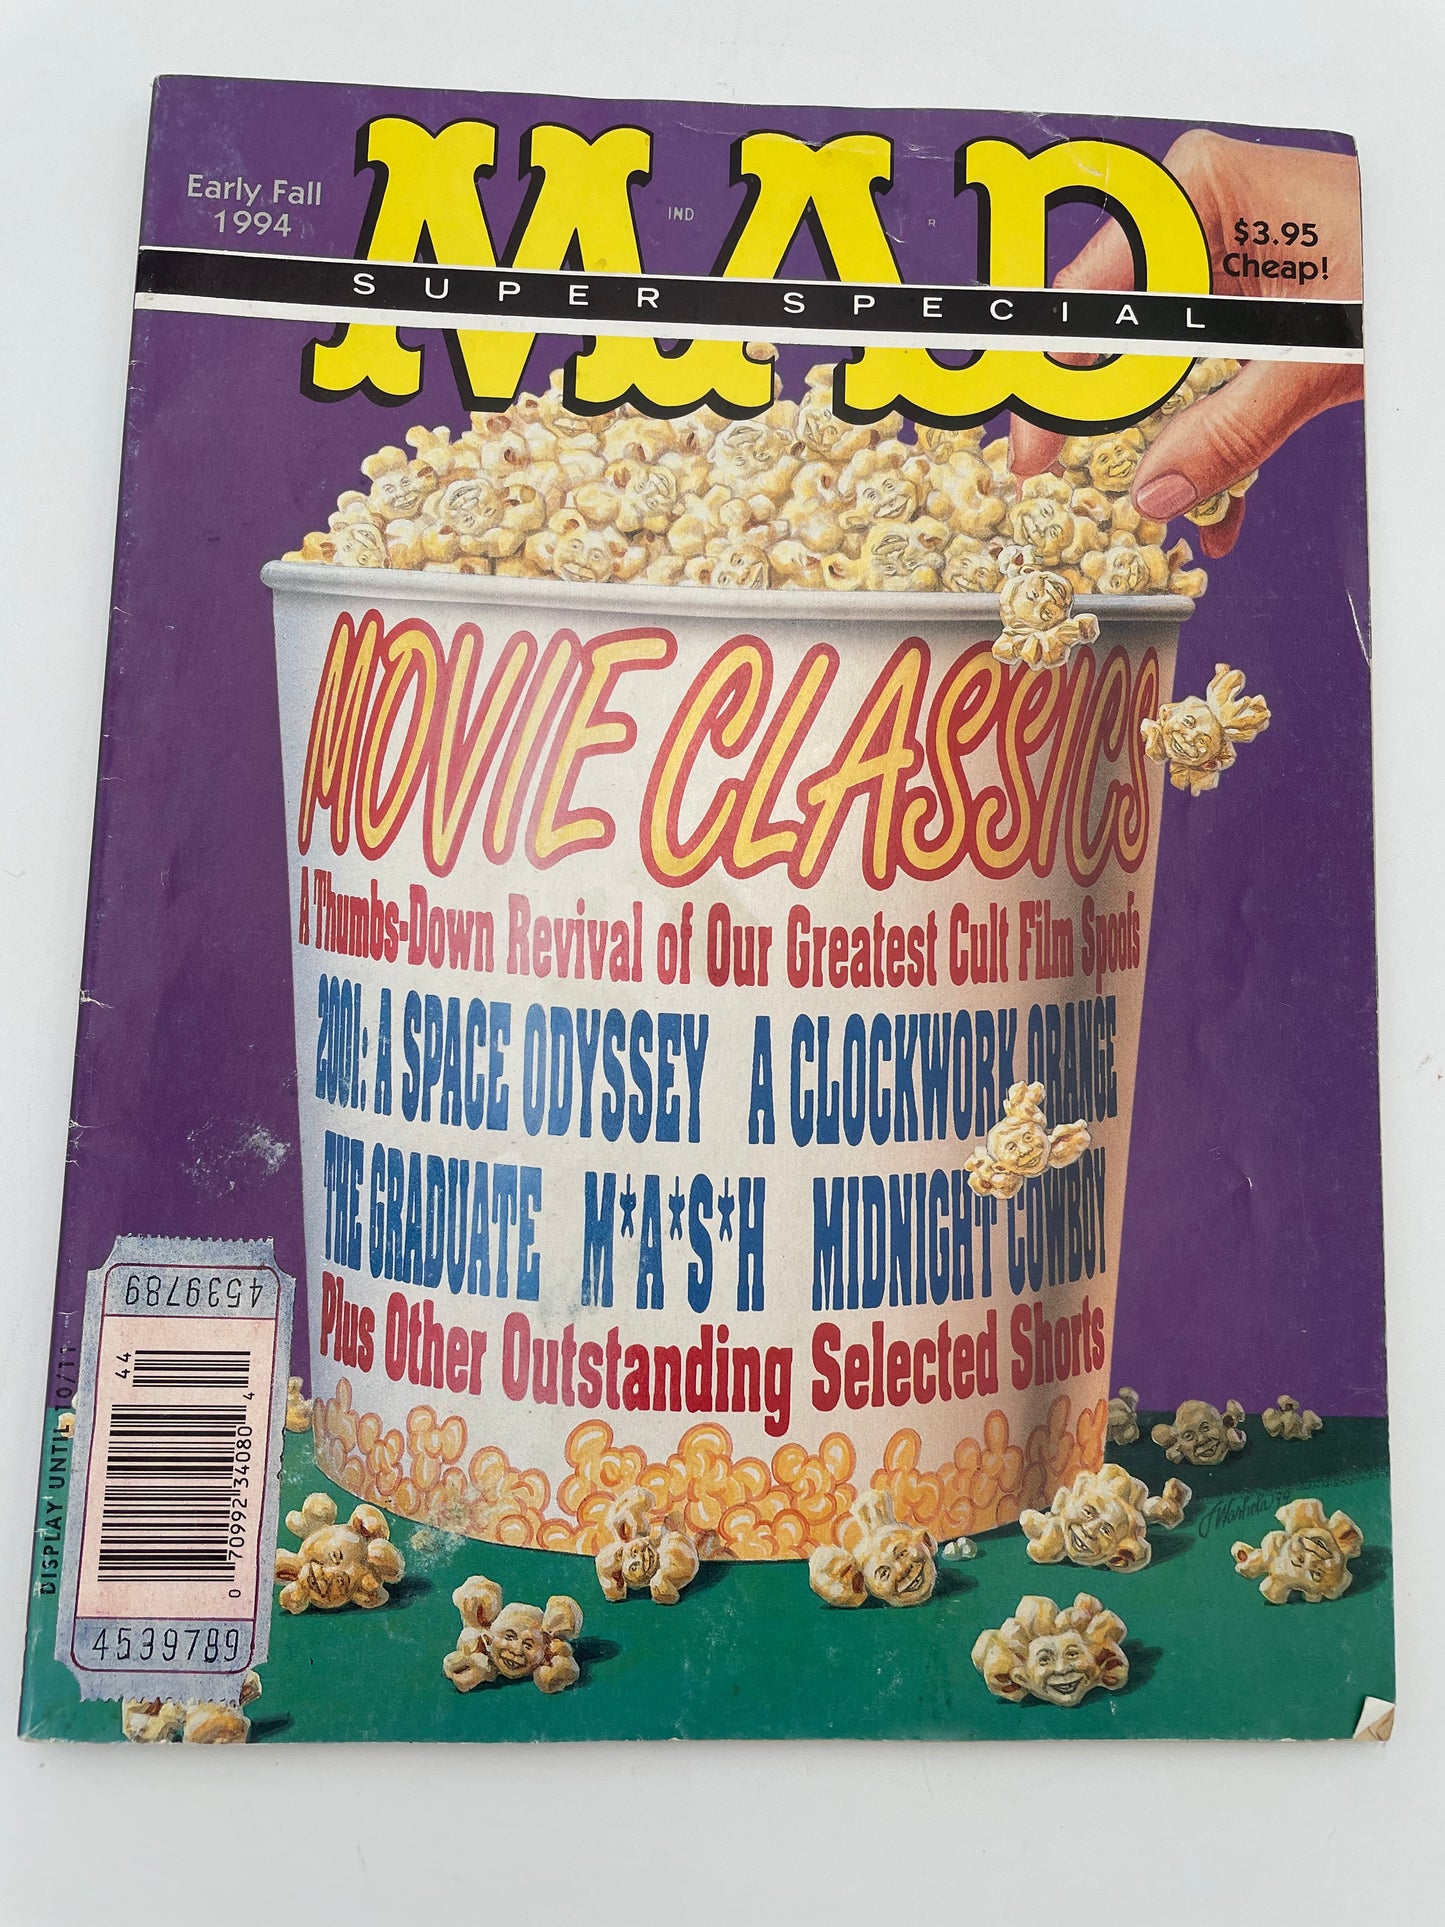 Mad Magazine - Super Special Early Movie Classics - Fall 1994 #101543